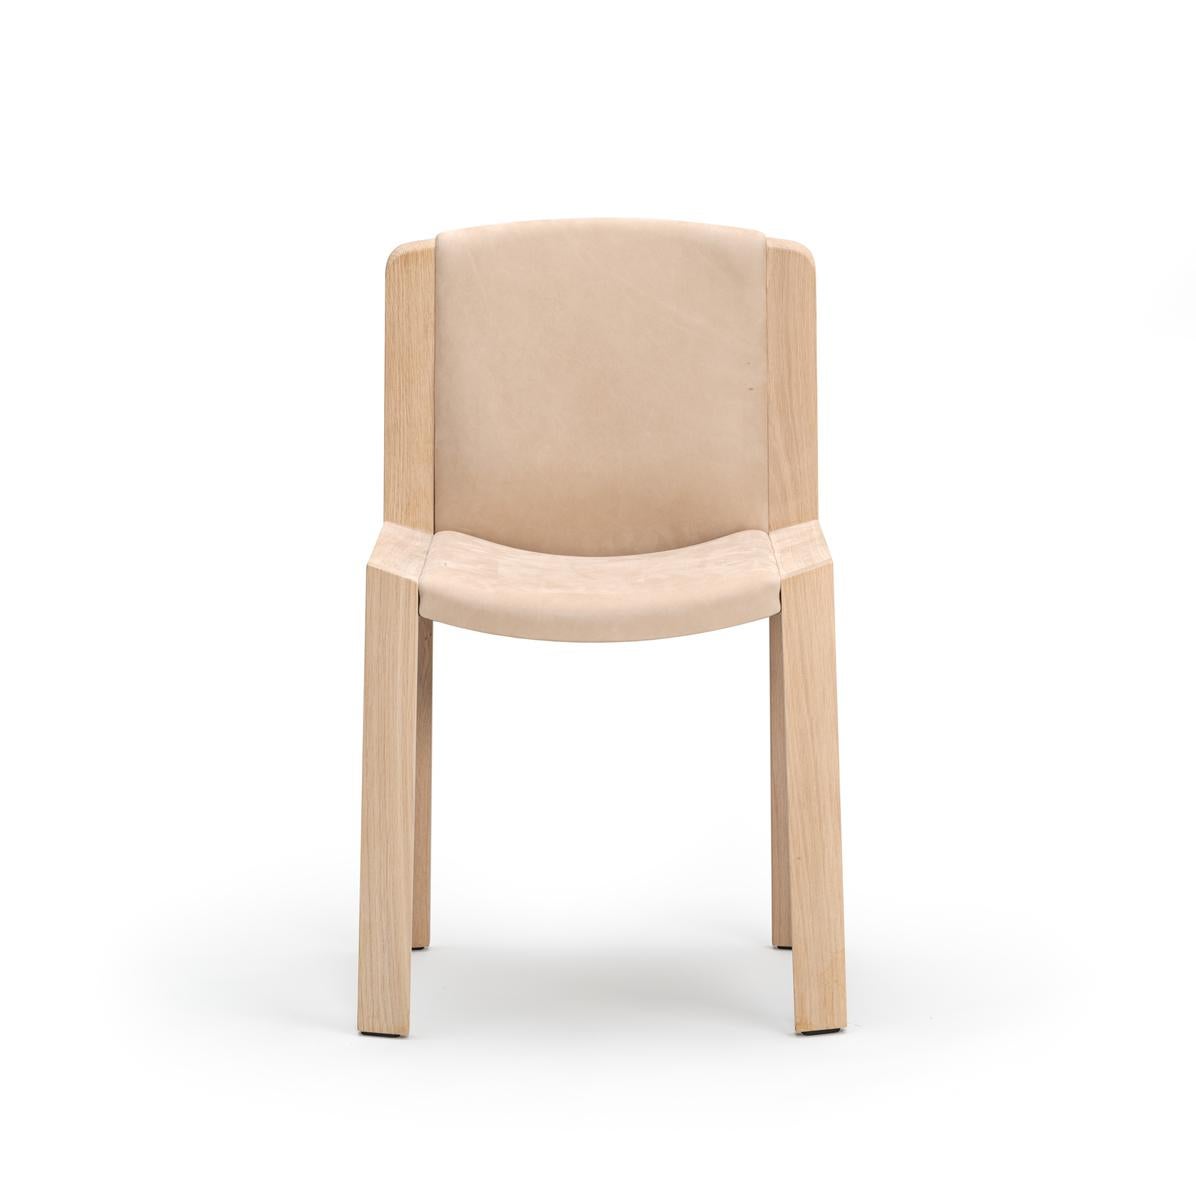 Joe Colombo 'Chair 300' Wood and Sørensen Leather by Karakter For Sale 11